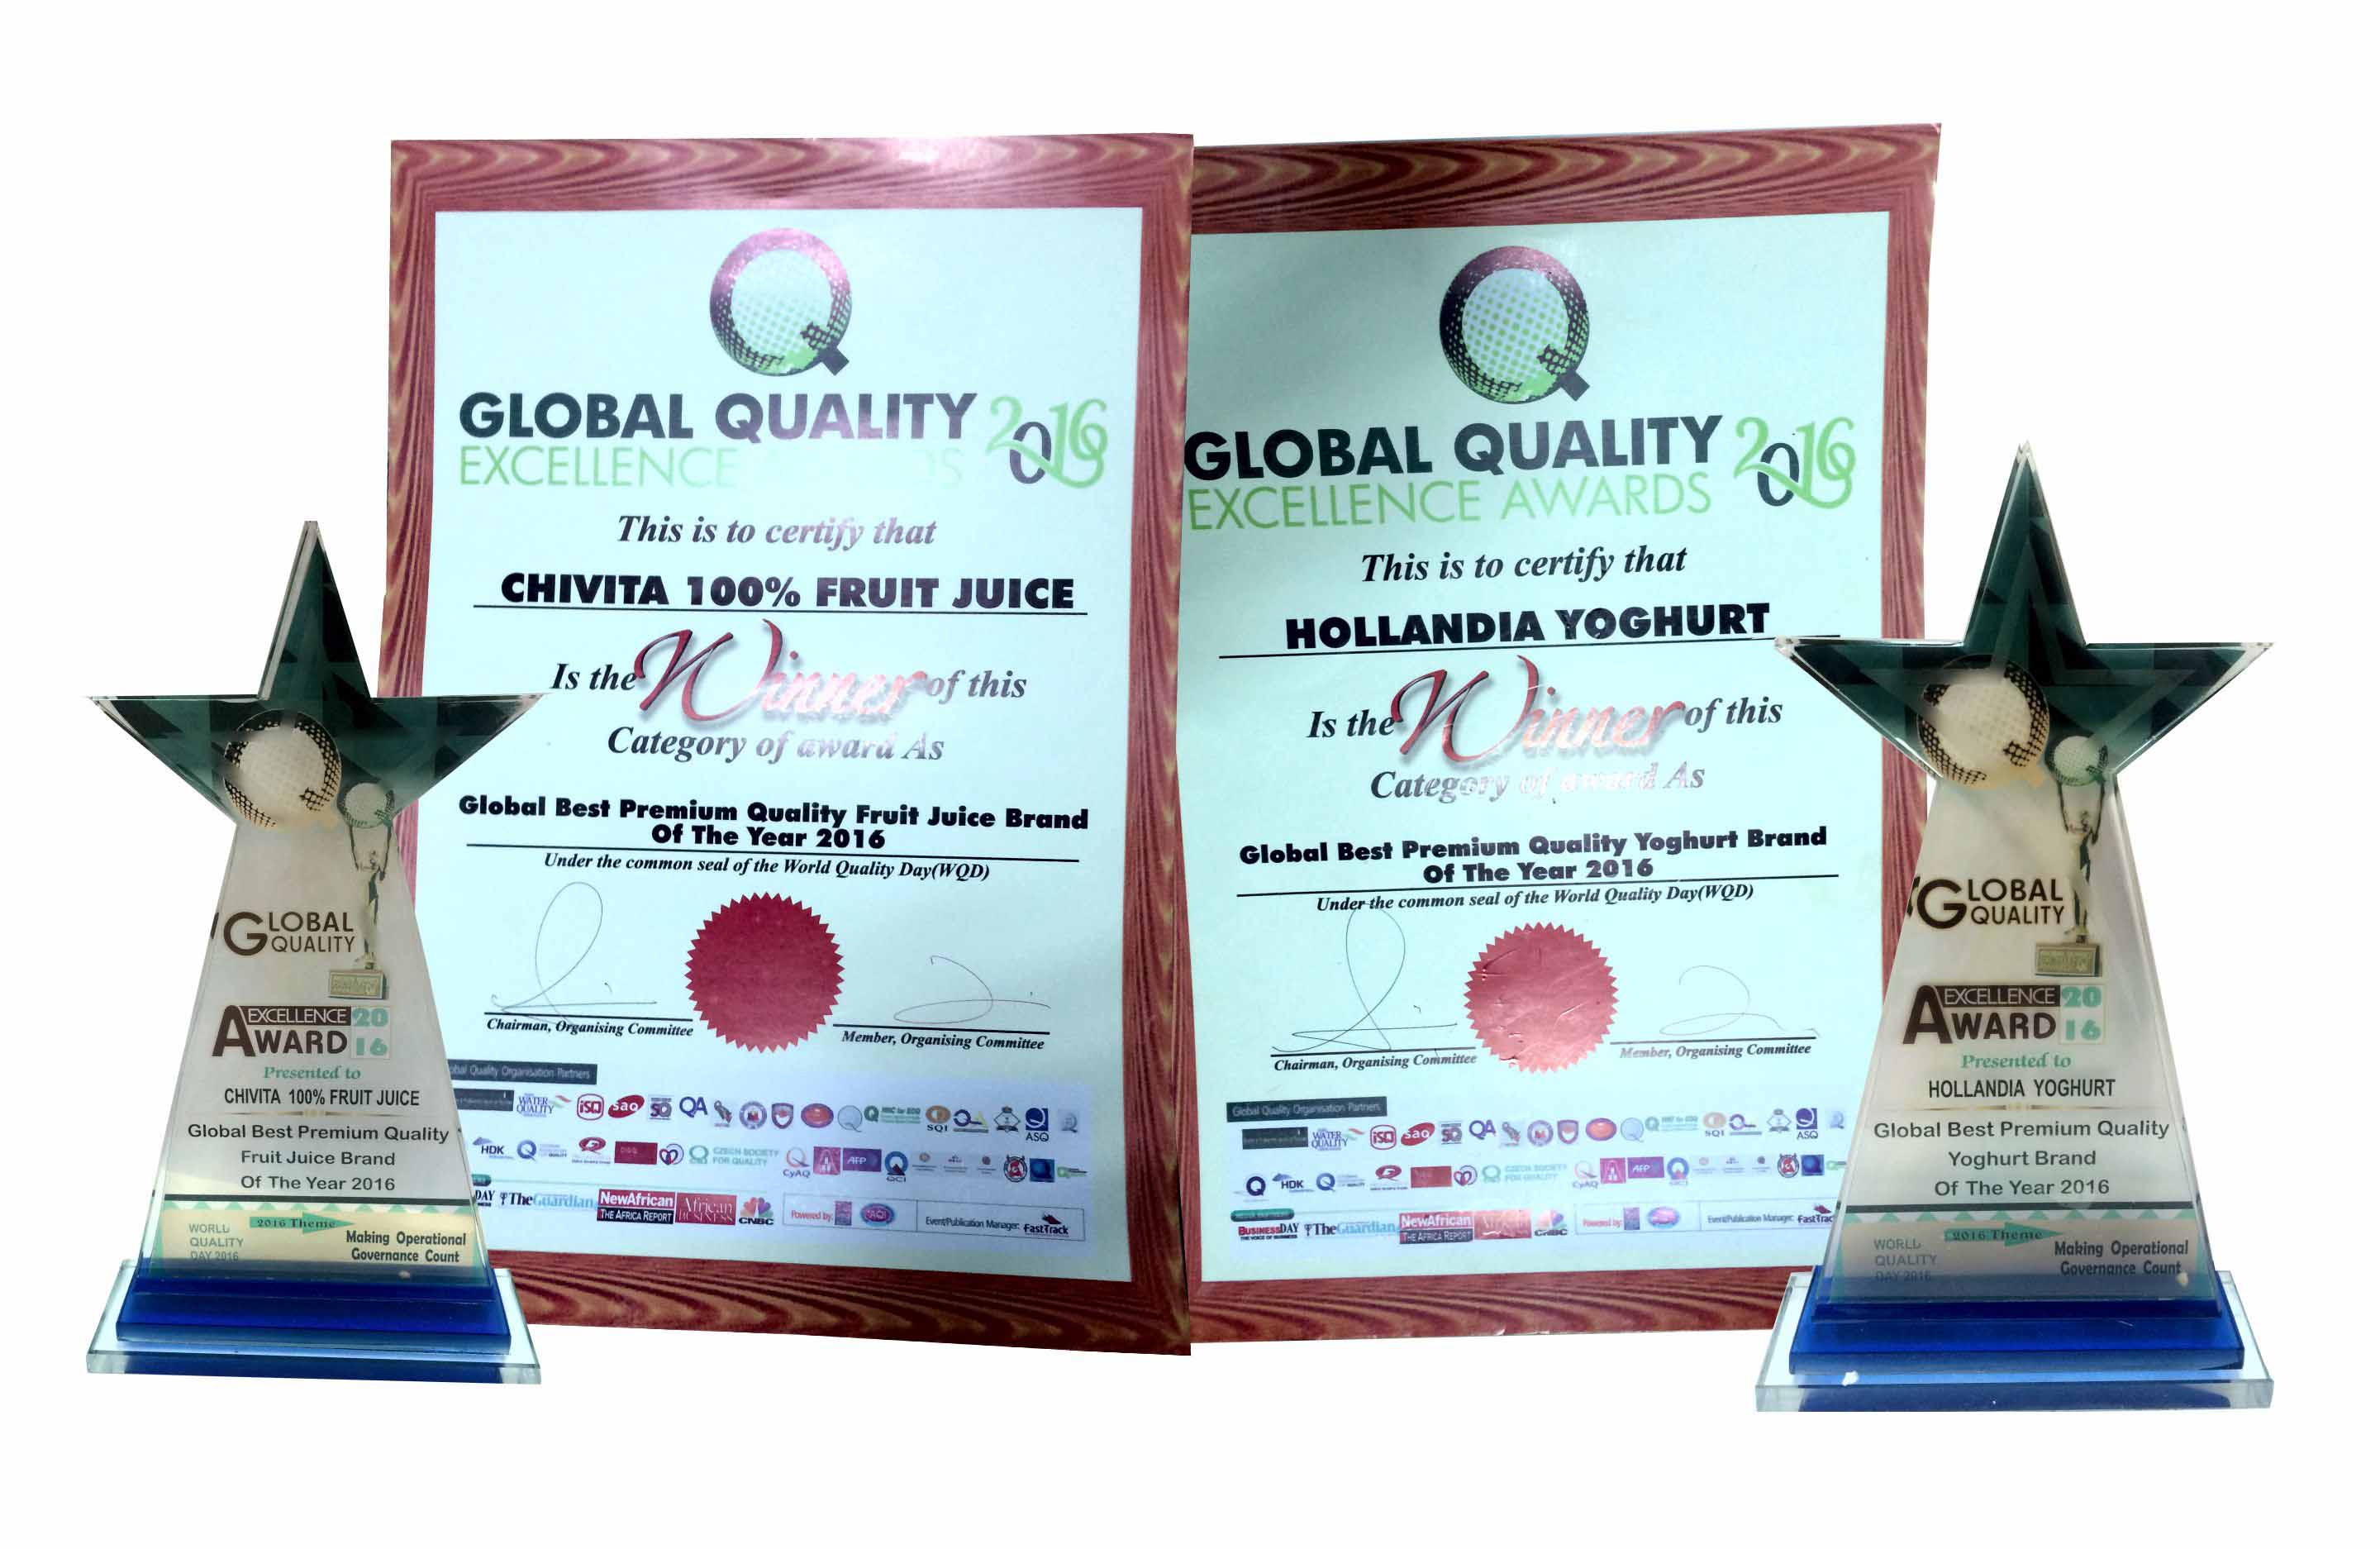  Chi Limited Grabs Two Trophies At Global Quality Excellence Awards 2016-marketingspace.com.ng